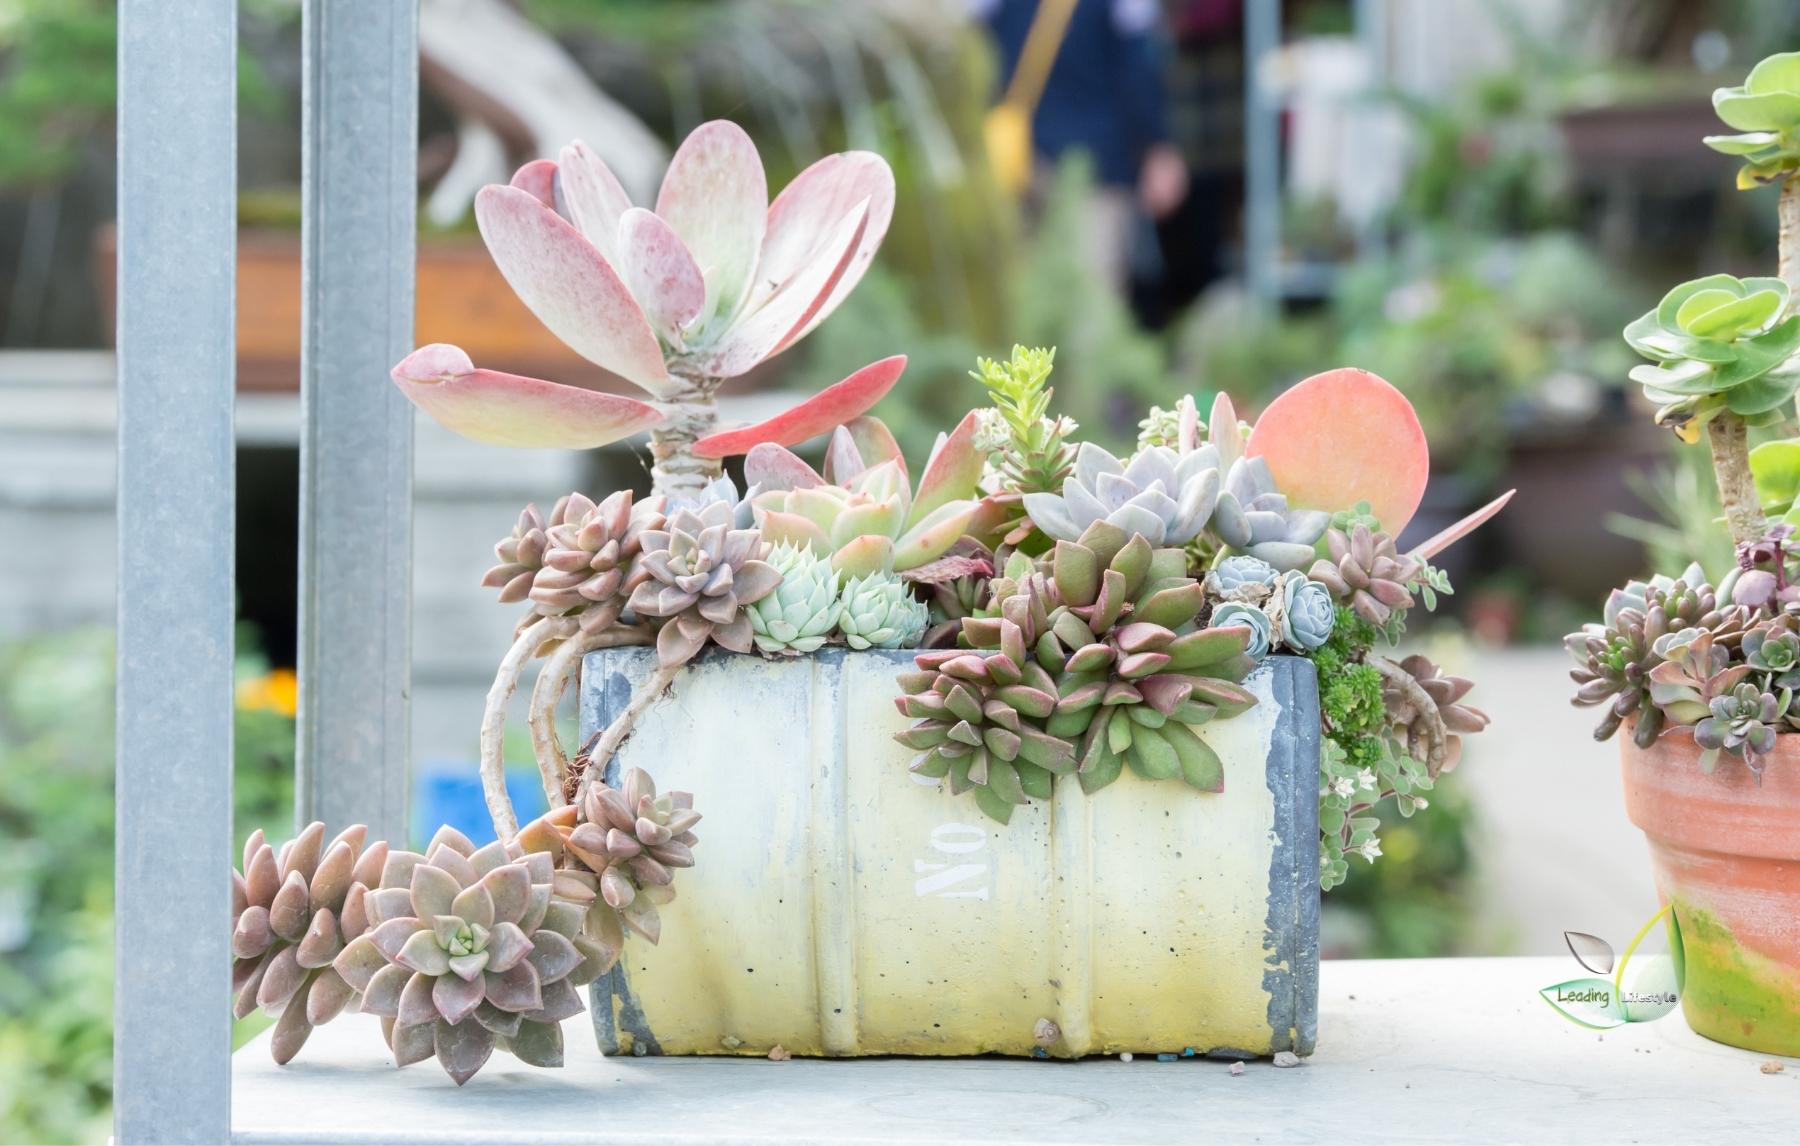 Planting Succulents The Easiest Way to Brighten Your Home cover